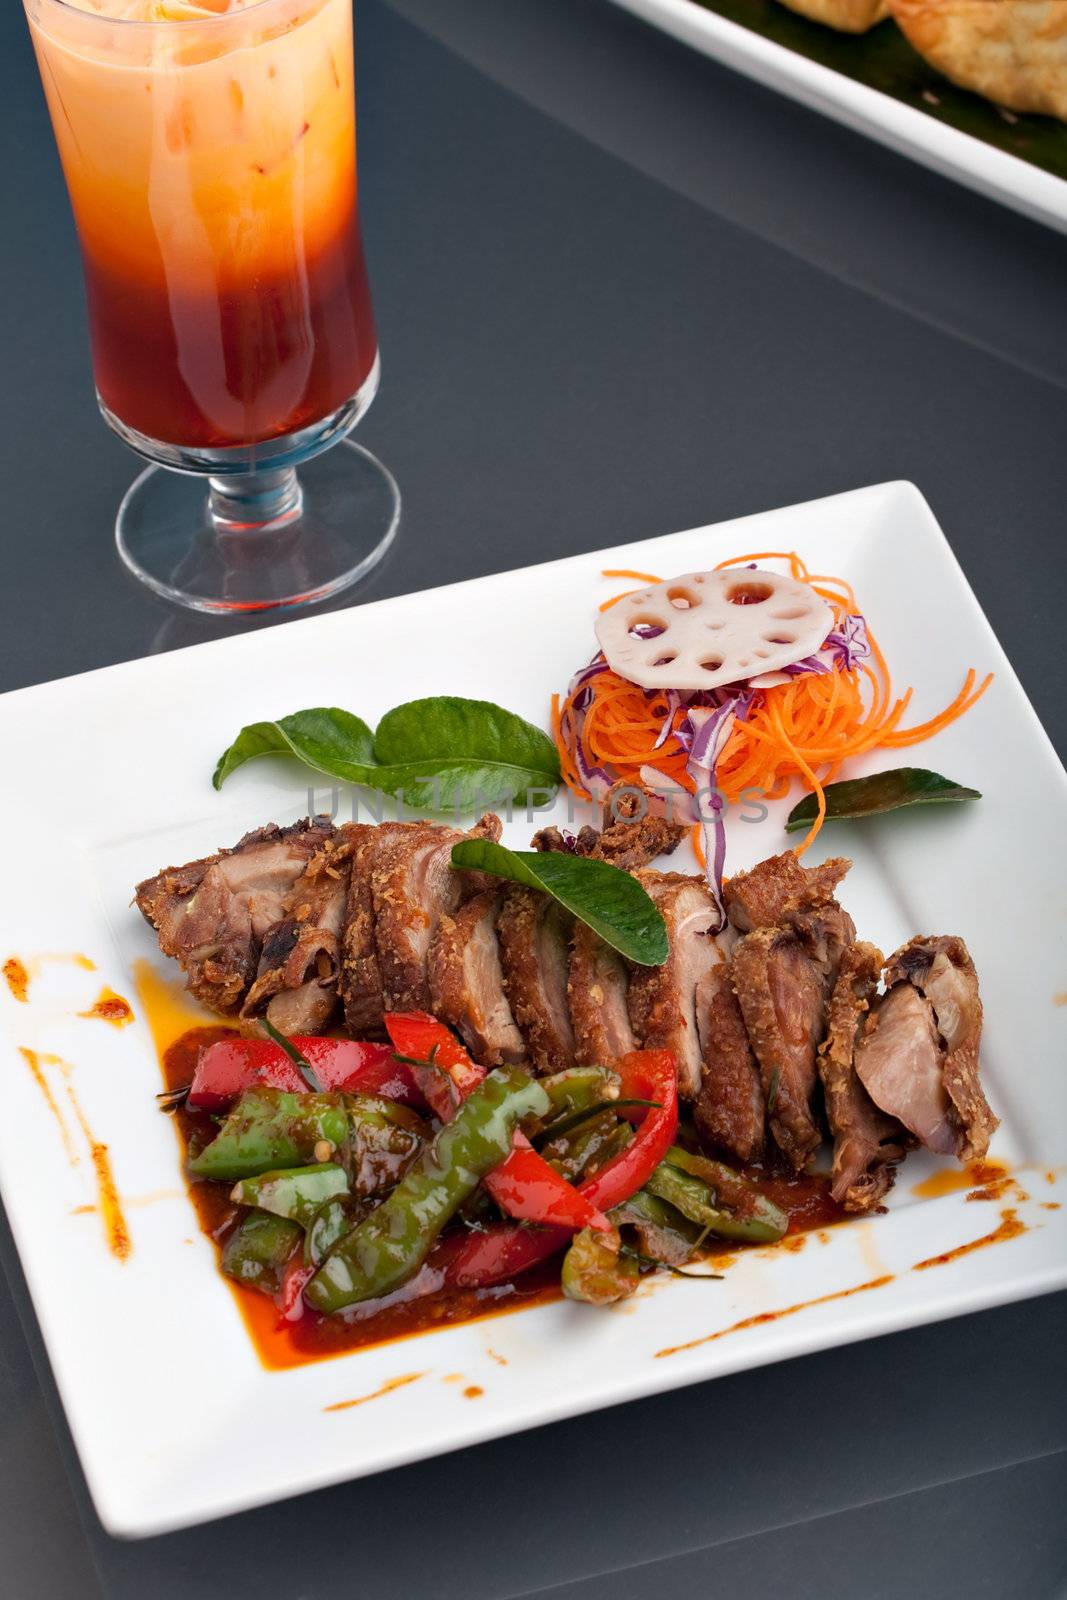 A beautifully presented dish of Thai style roast chile basil duck with mixed vegetables and thai iced tea.